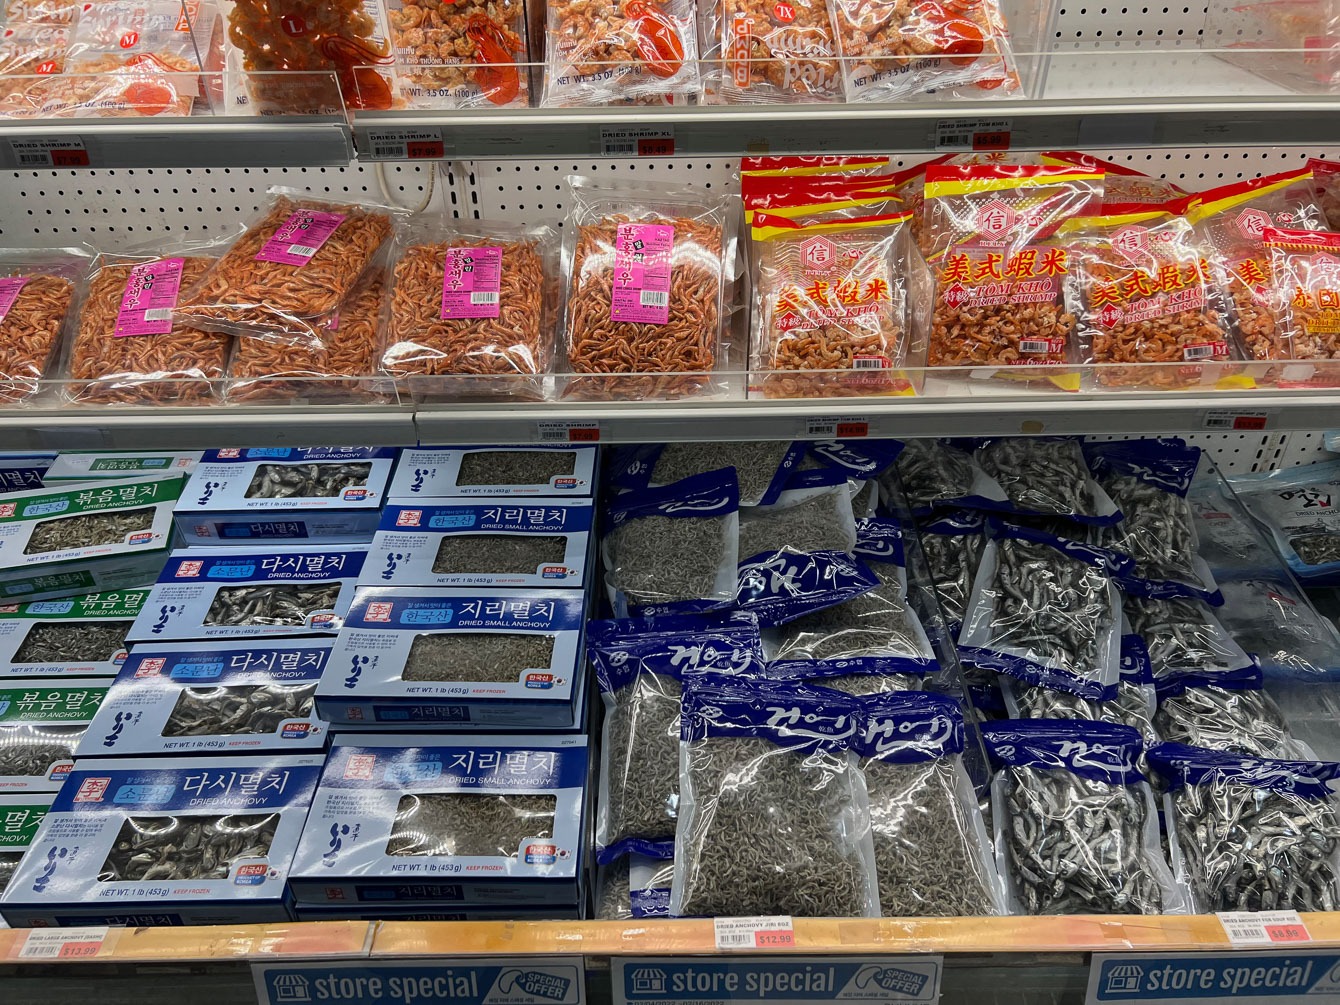 Korean dried anchovies and shrimps are common Korean food ingredients.